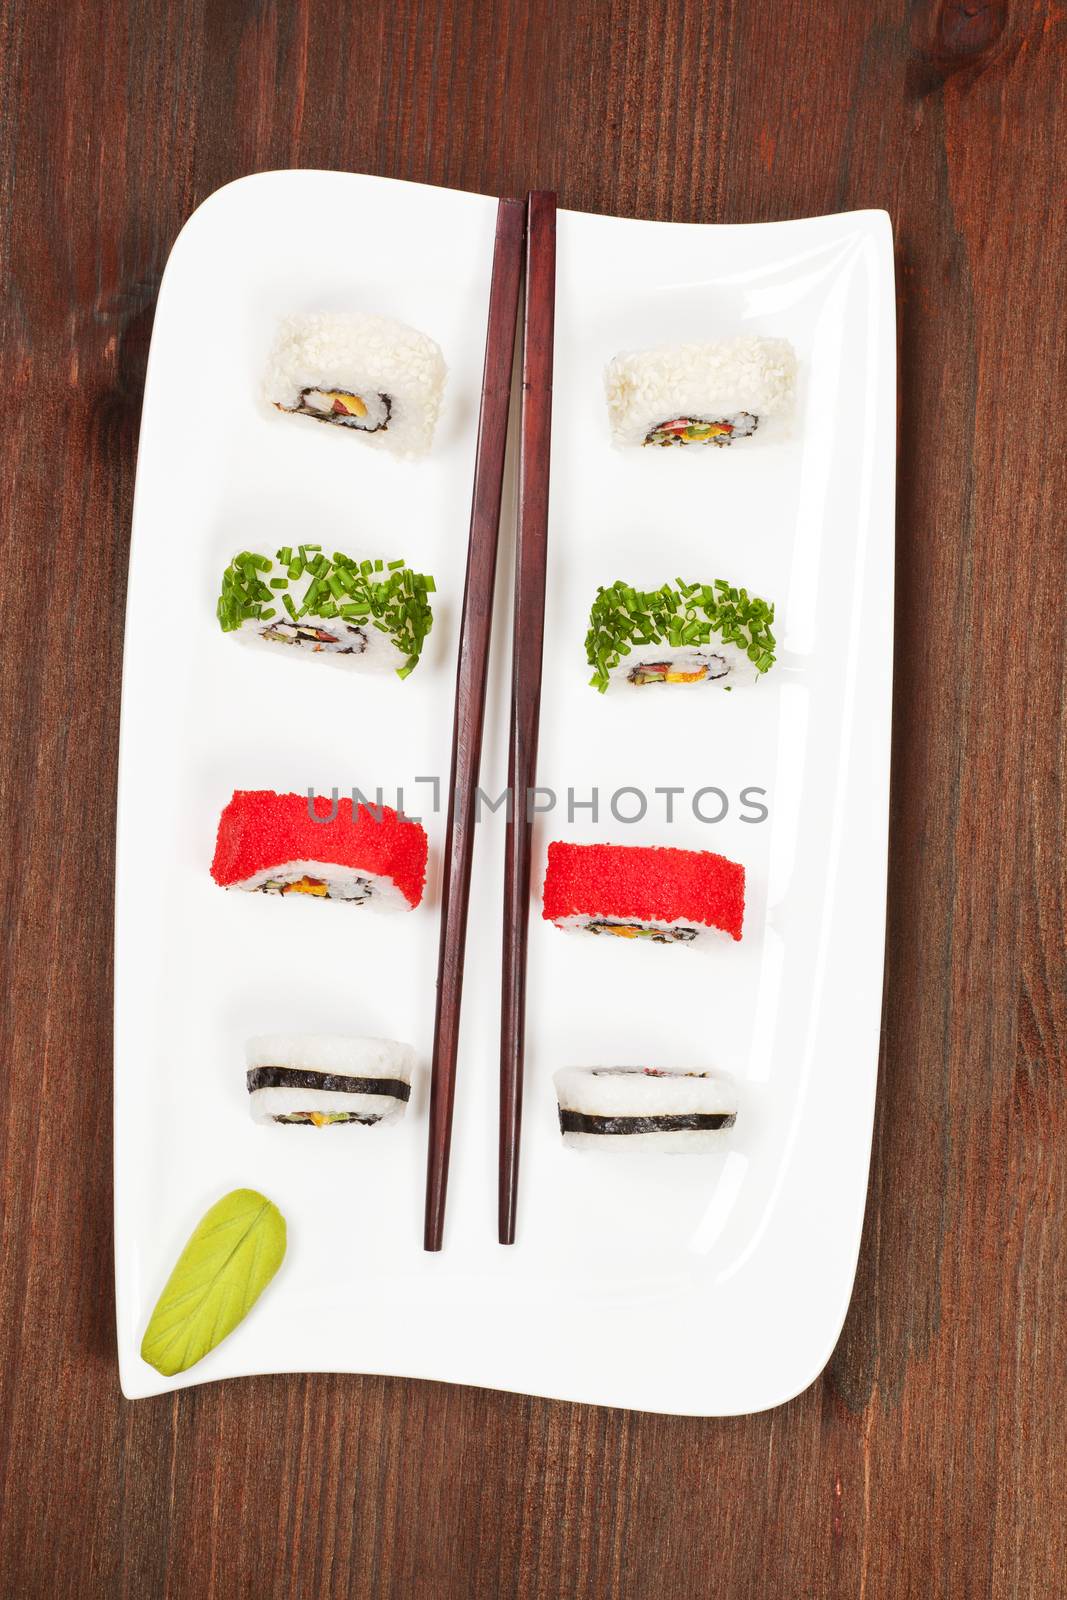 California sushi rolls with chive, sesame and caviar on white plate. Top view.